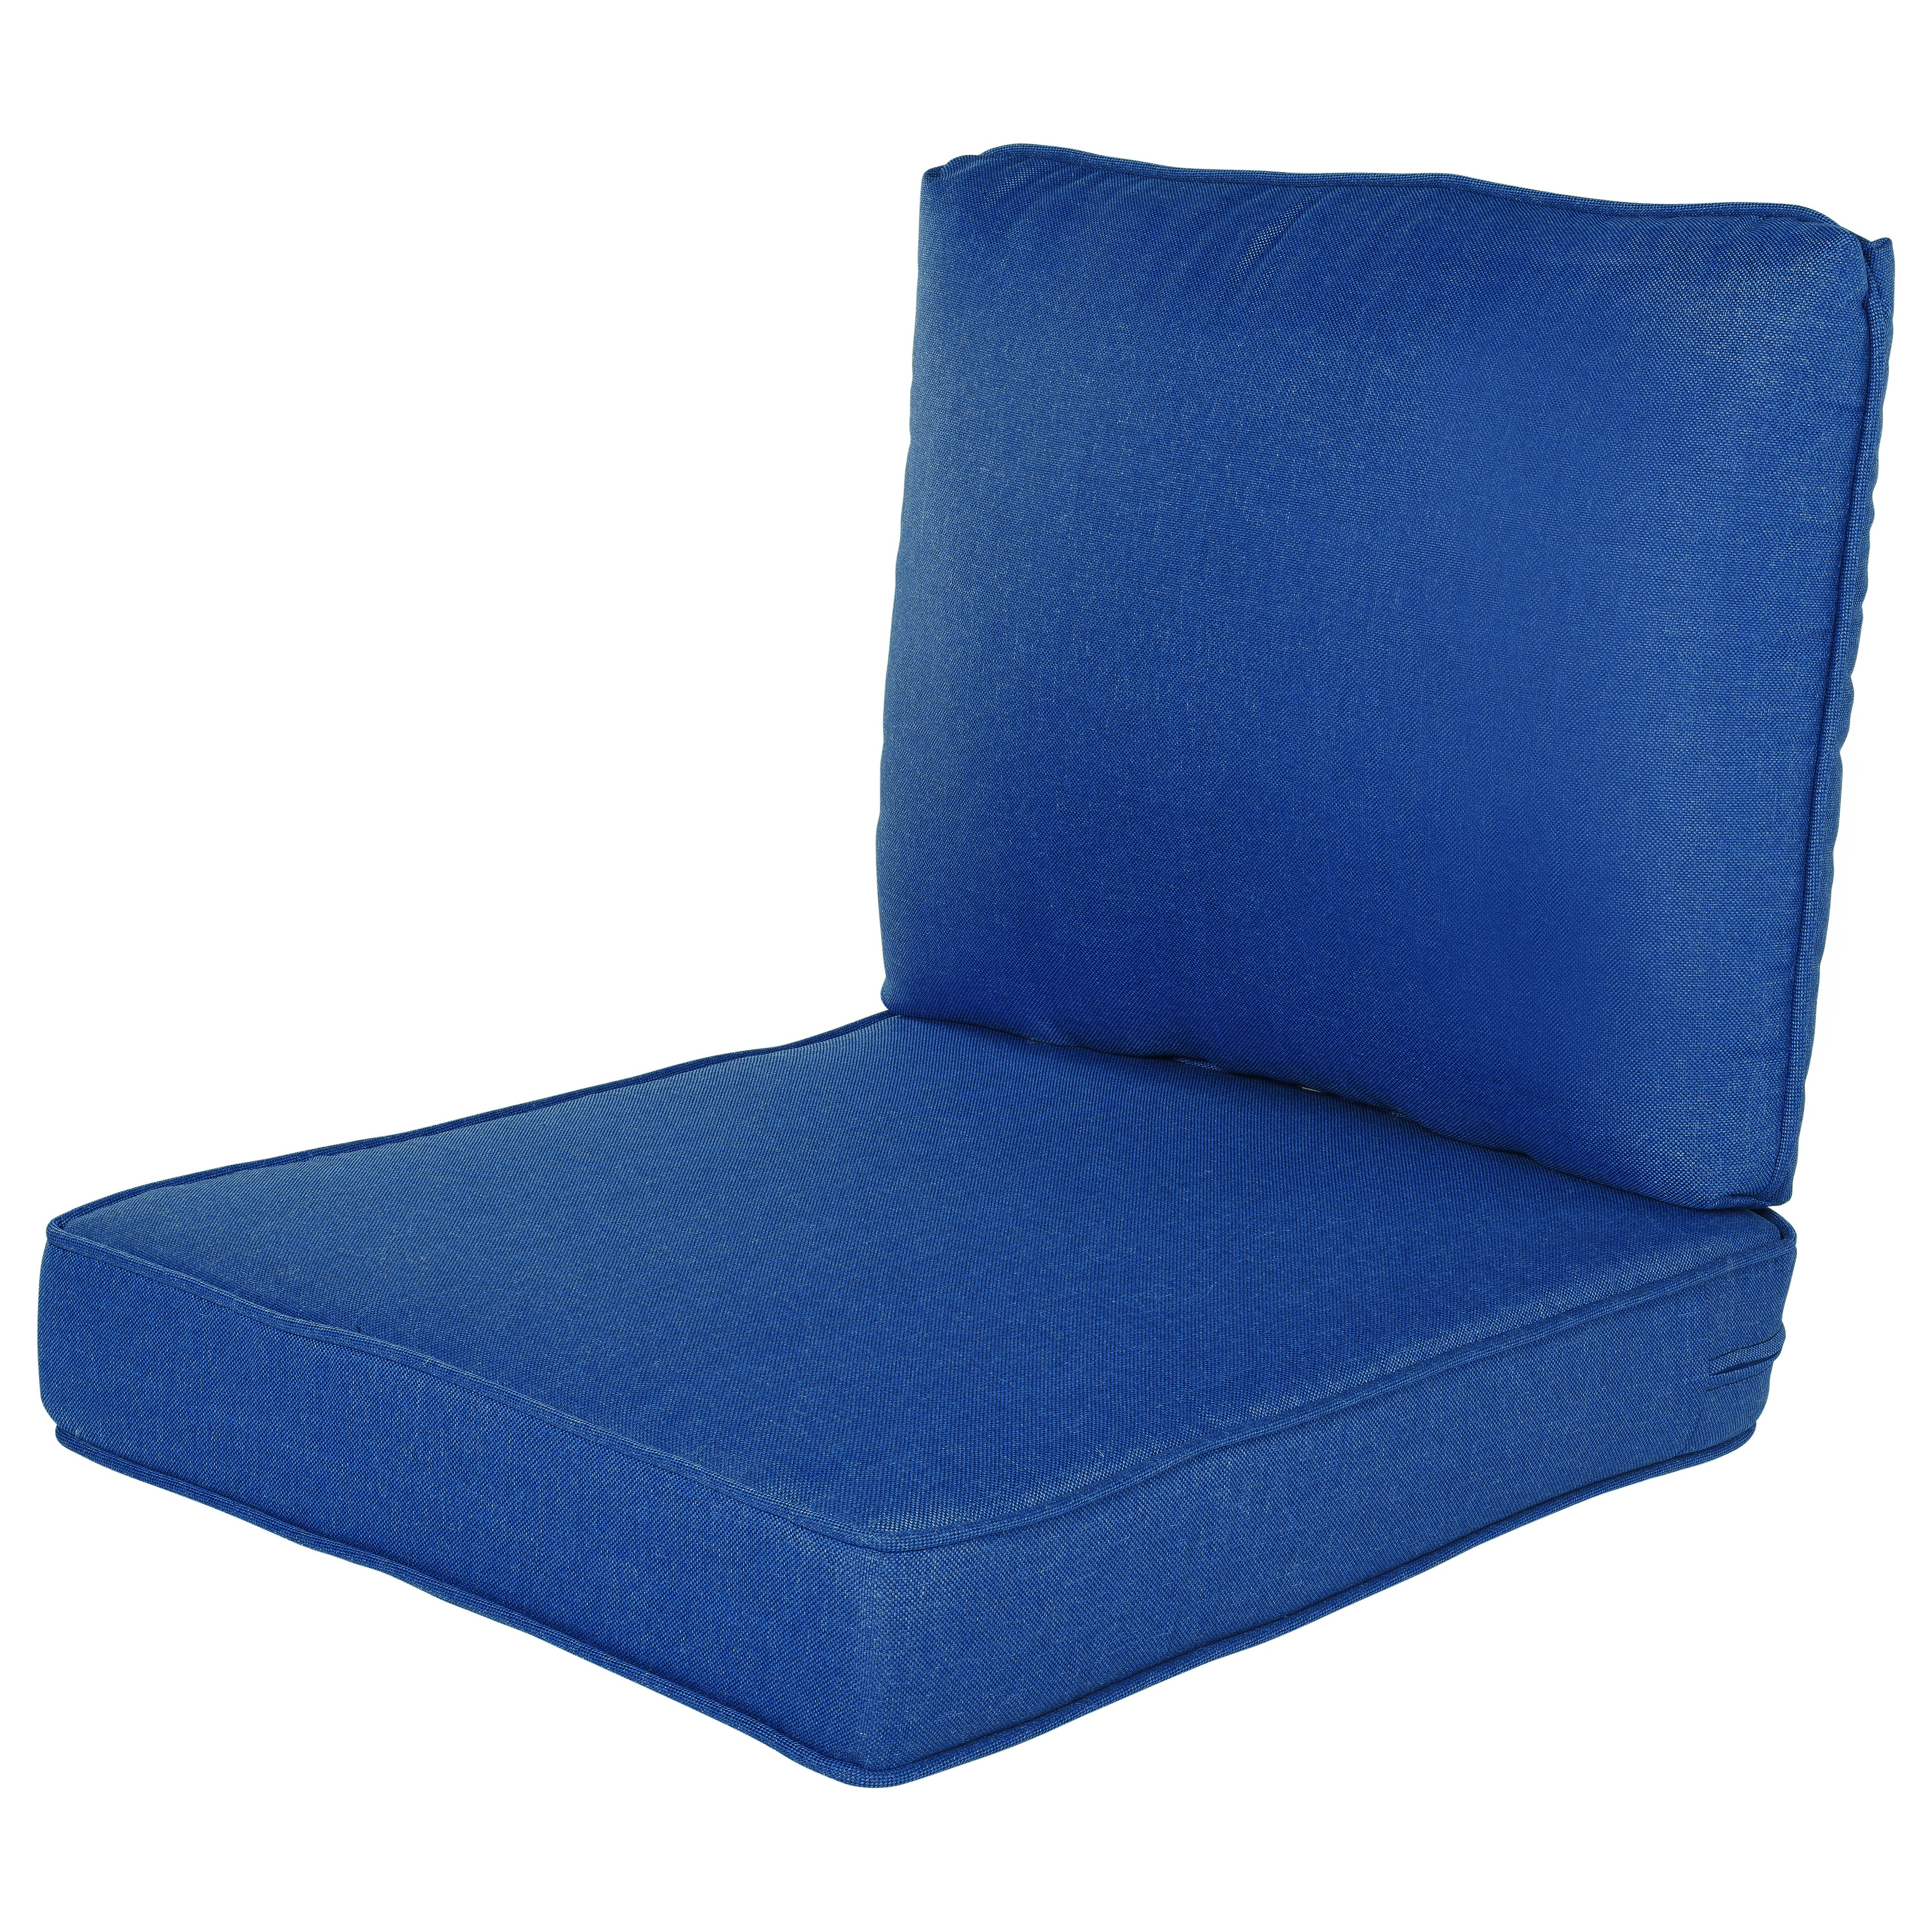 https://ak1.ostkcdn.com/images/products/is/images/direct/a7f570b0c64b552baddcf33fb898b3d7ae715c2d/Haven-Way-Outdoor-Seat-%26-Back-Cushion-Set.jpg